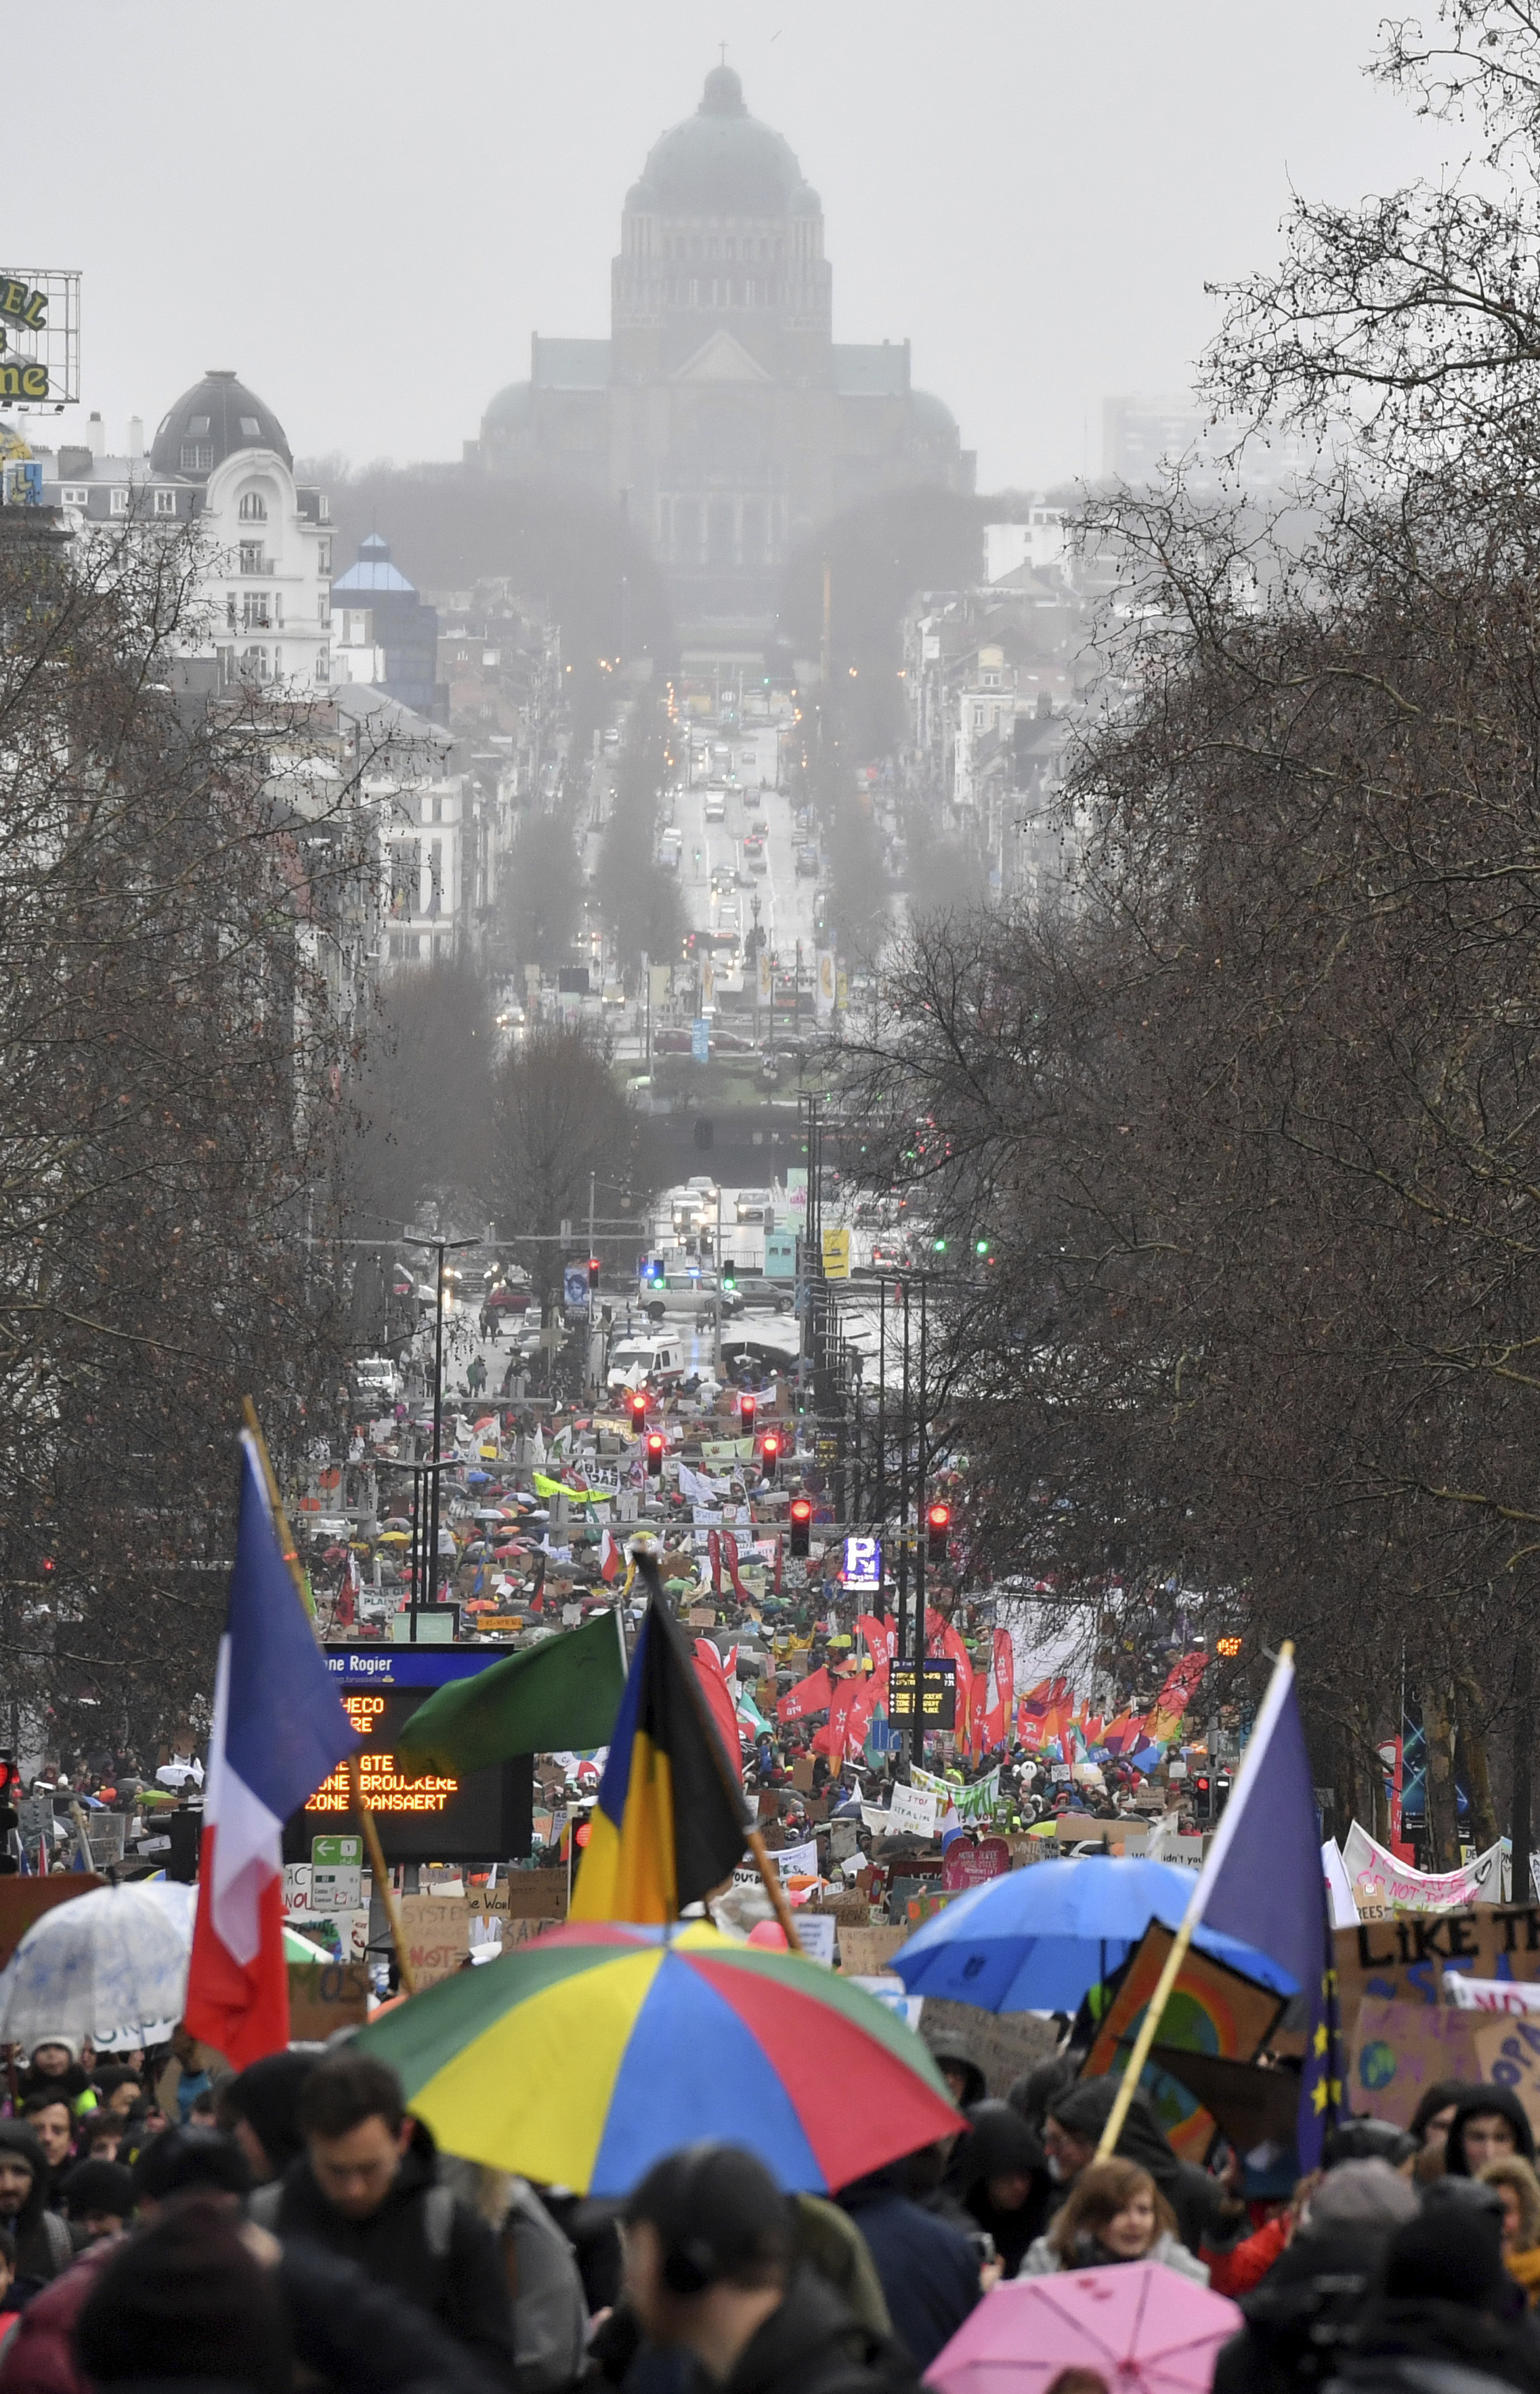 Protestors march during a Rise for the Climate demonstration in Brussels, Sunday, Jan. 27, 2019. (AP Photo/Geert Vanden Wijngaert)